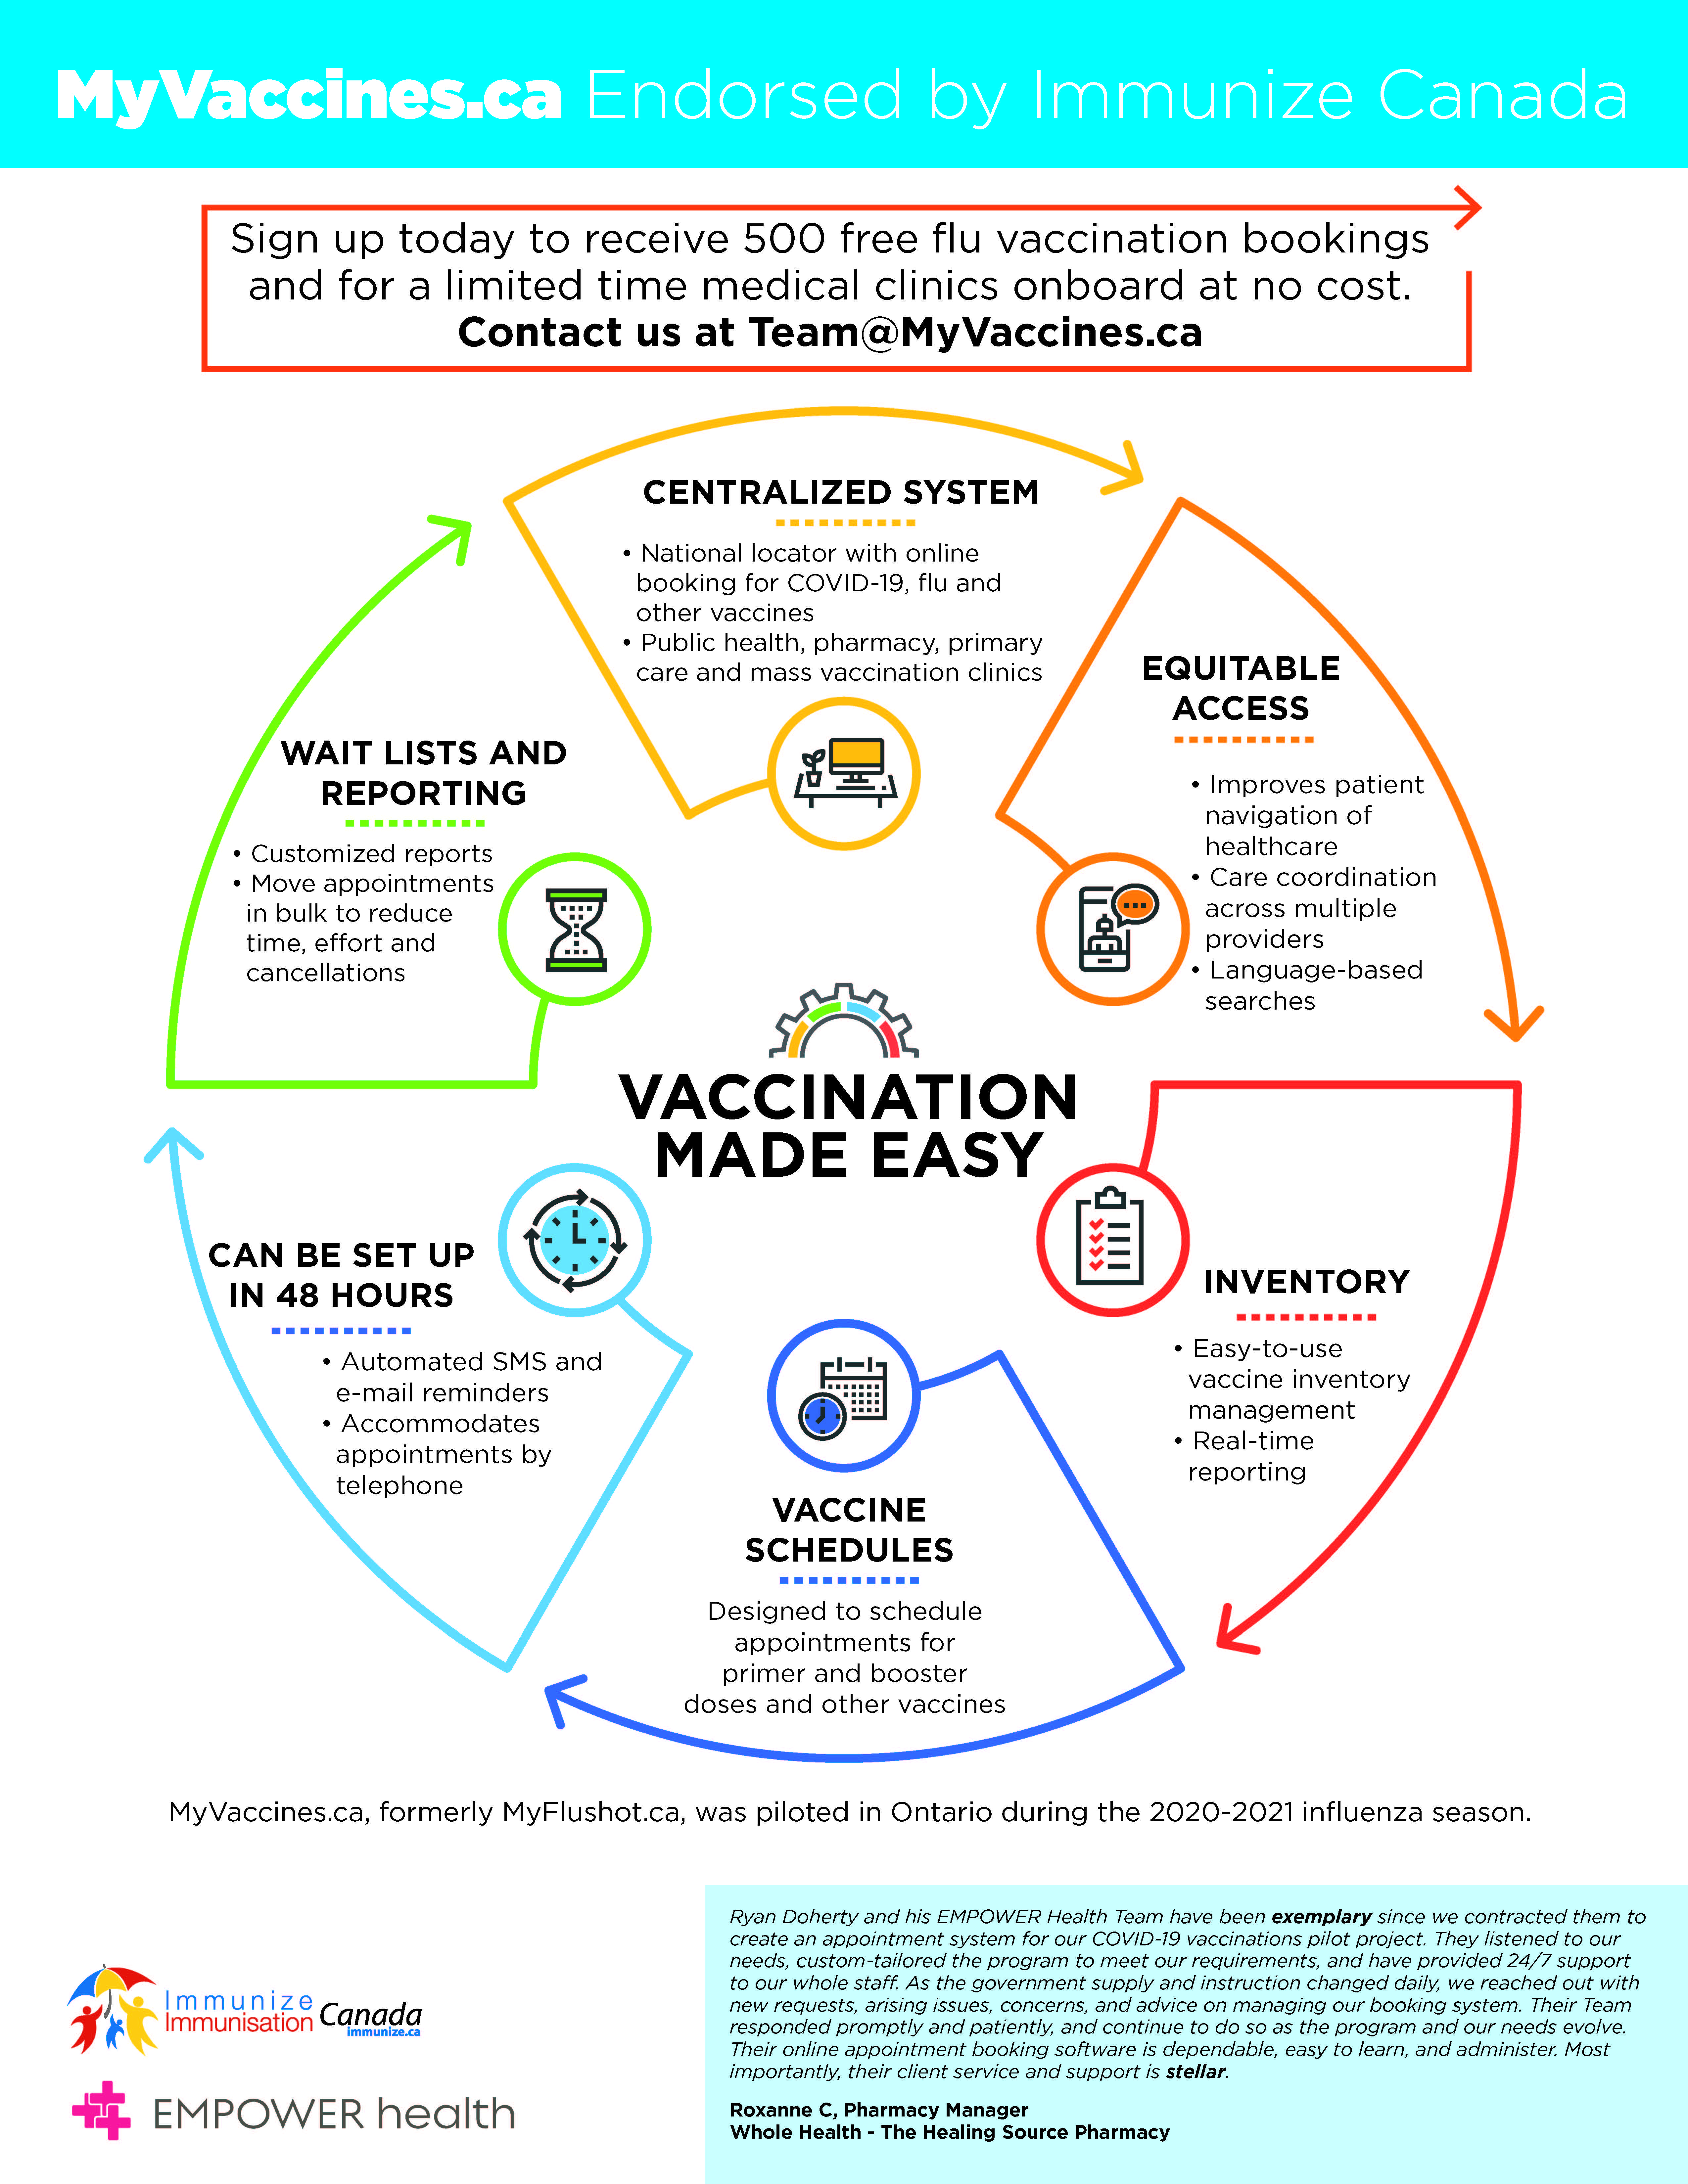 Vaccination Made Easy